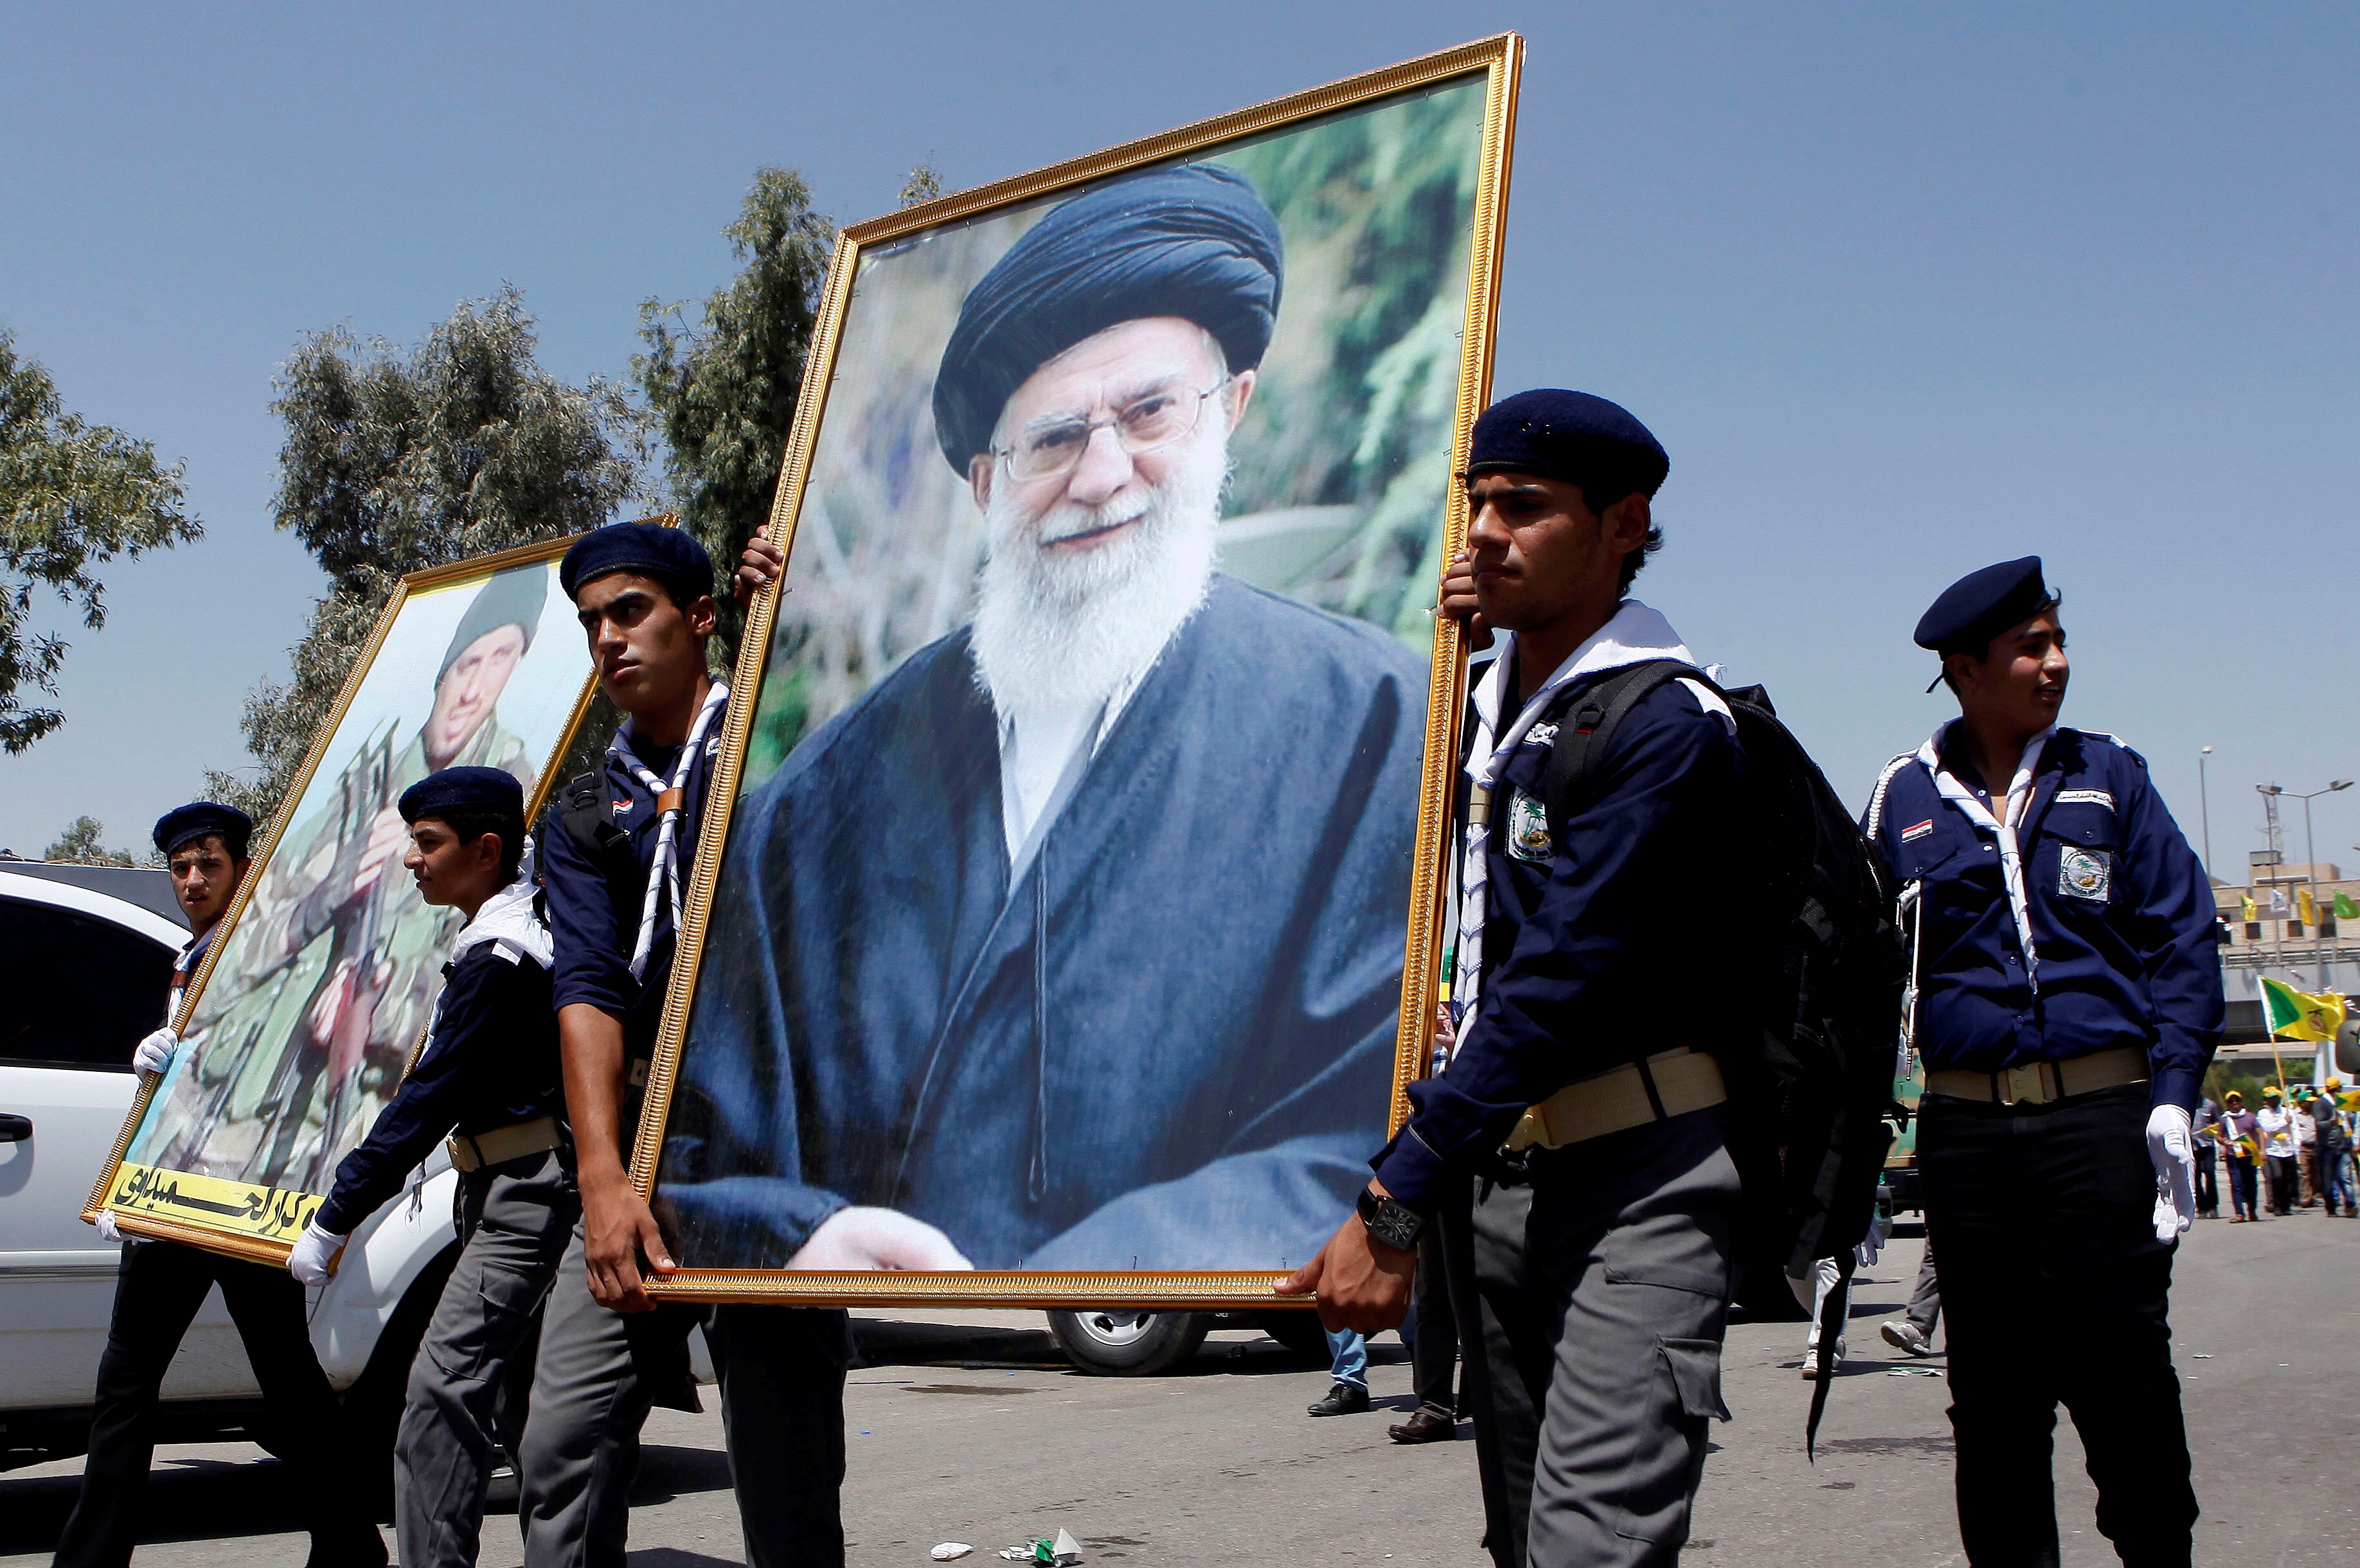 Reuters exclusive: Iran changed tactic, created small elite military groups in Iraq